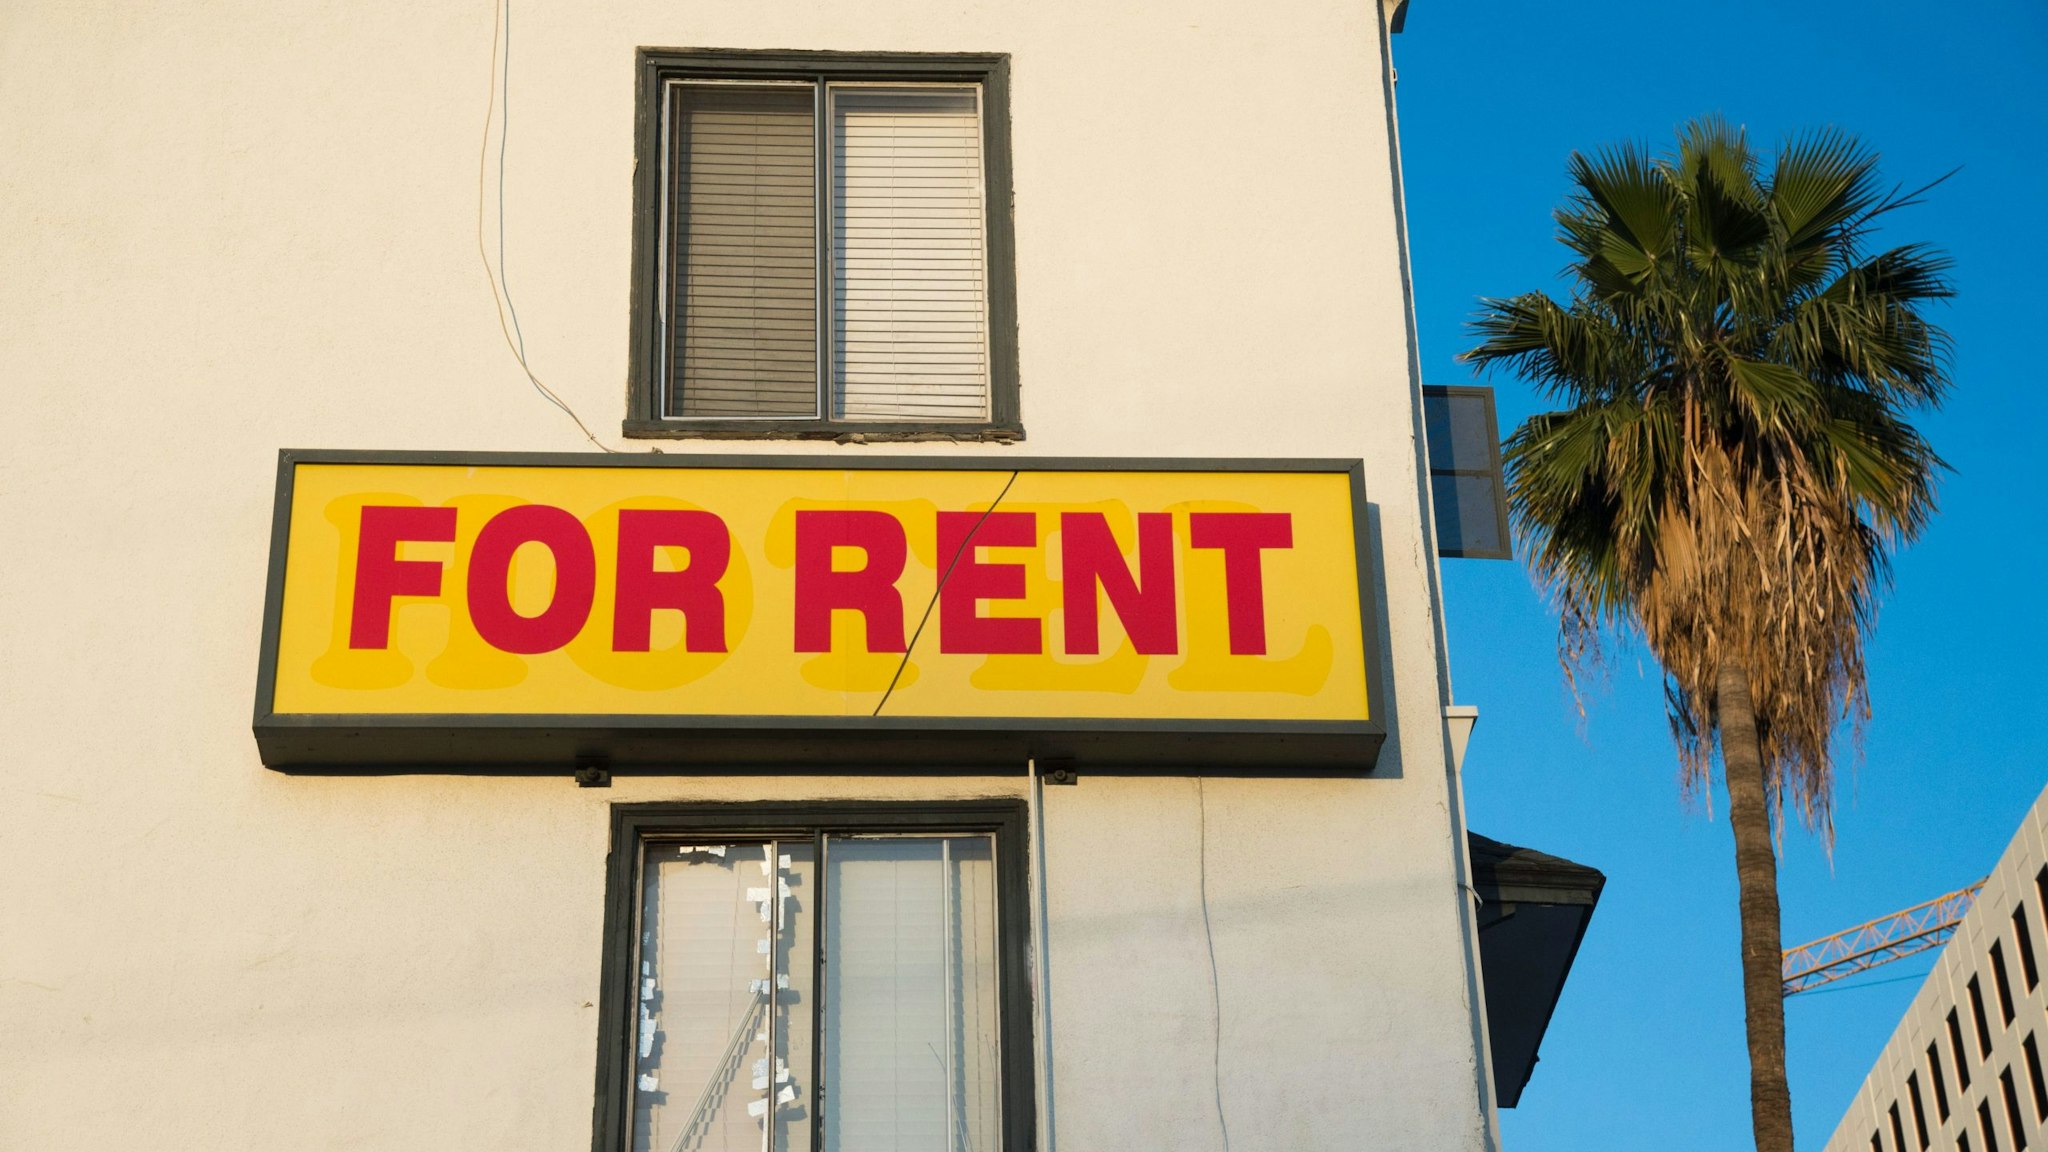 A "For Rent" sign is seen on a building Hollywood, California, May 11, 2016. Angelinos are feeling the increasing burden of rising rents and threats of eviction as forecast indicate rent prices will continue to rise through 2018. / AFP / ROBYN BECK (Photo credit should read ROBYN BECK/AFP via Getty Images)